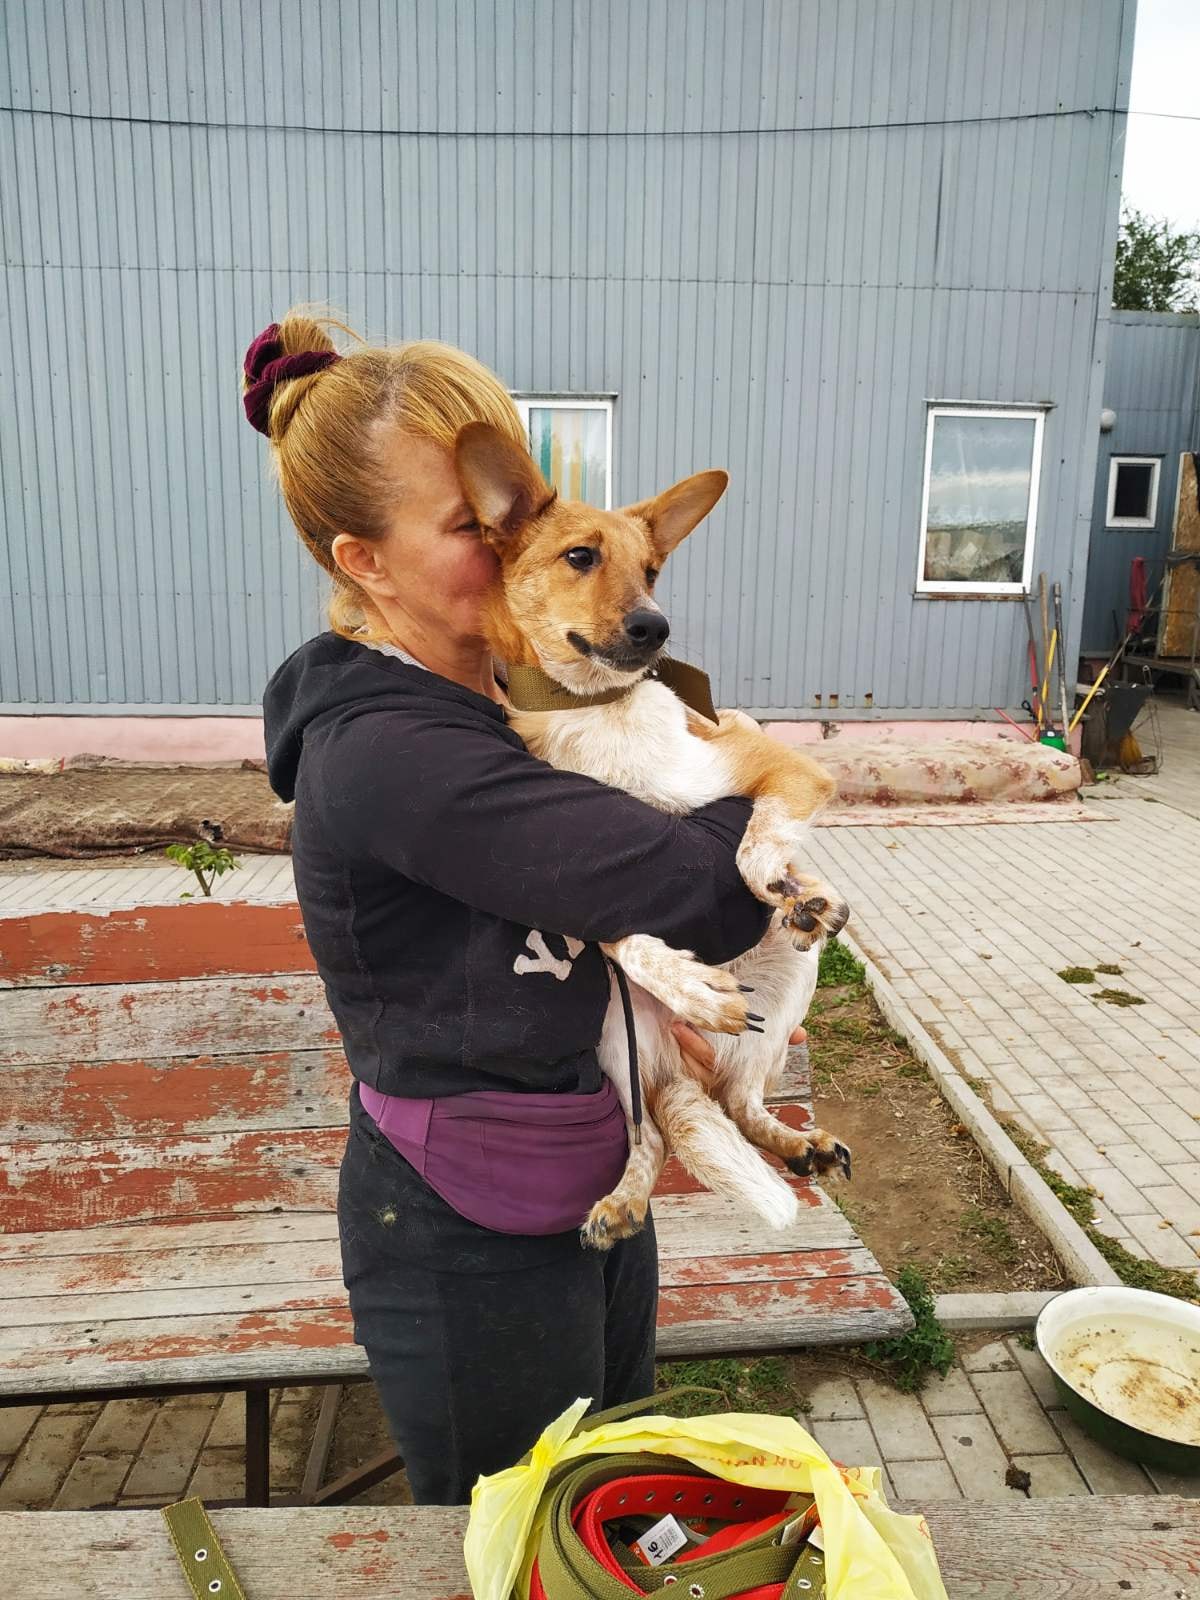 Joy with tears in the eyes: 12 disabled dogs from Nikopol went to EU